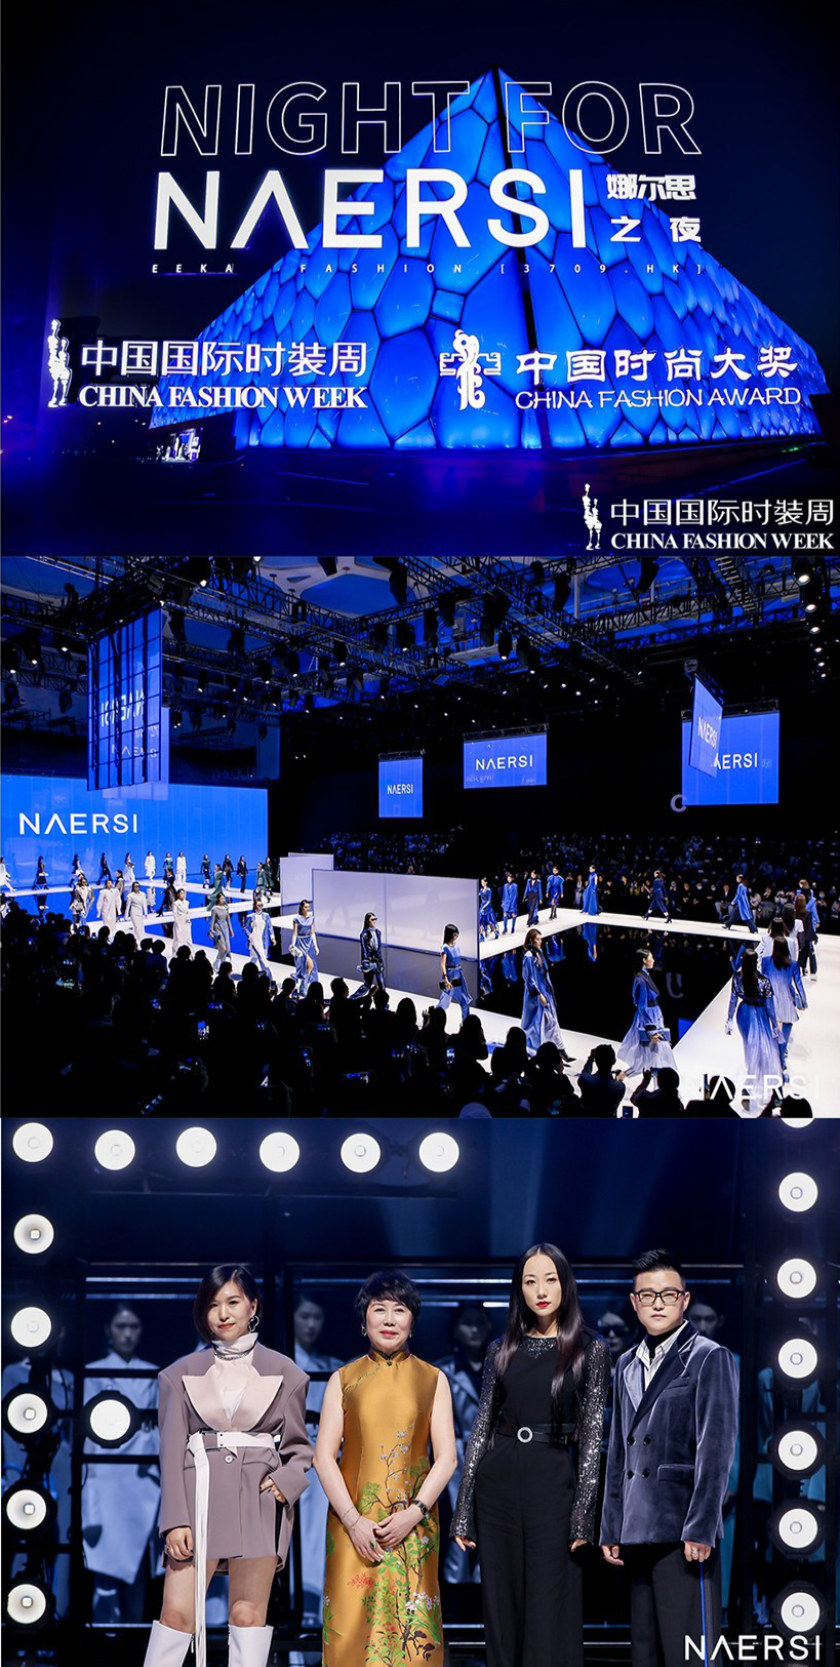 Naersi closes China Fashion Week with Water Cube spectacular